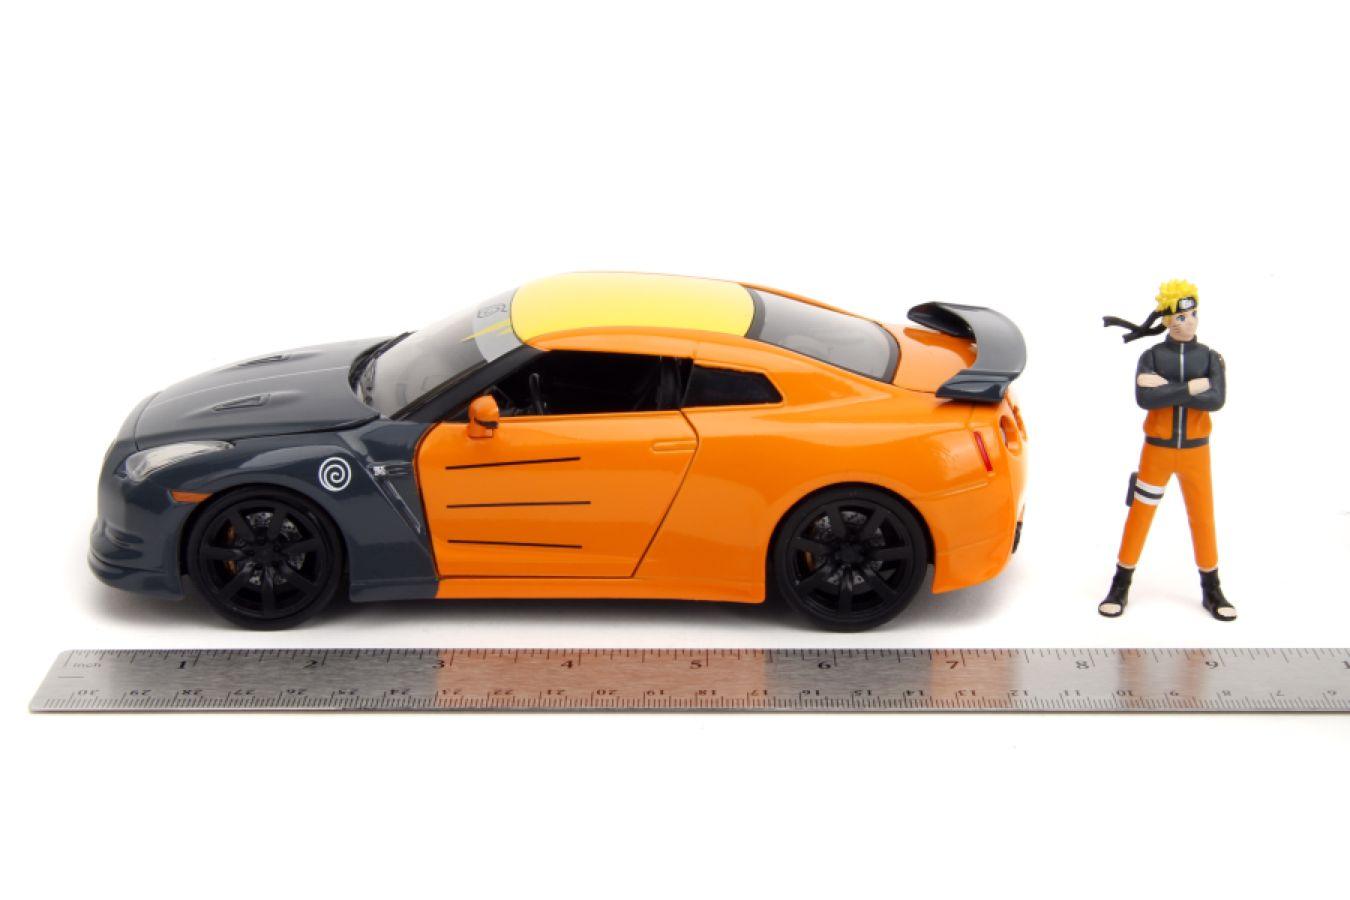 JAD33691 Naruto - Nissan GT-R R35 (2009) 1:24 Scale with Naruto Figure Hollywood Rides Diecast Vehicle - Jada Toys - Titan Pop Culture